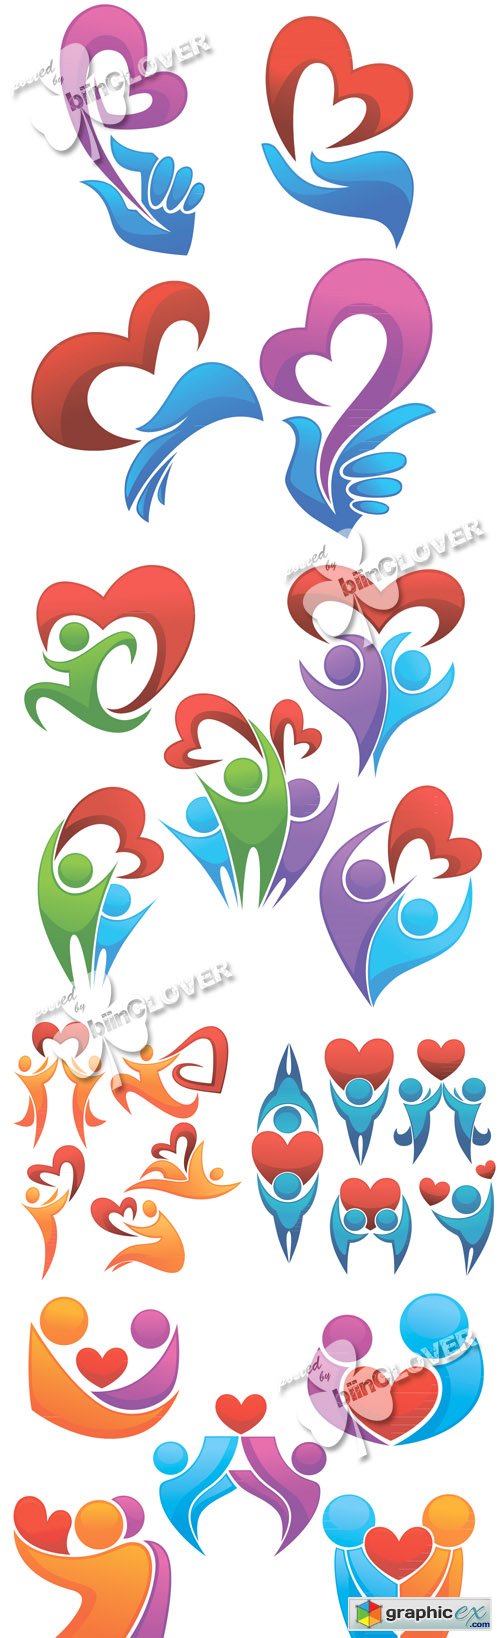 People with heart icons 0422